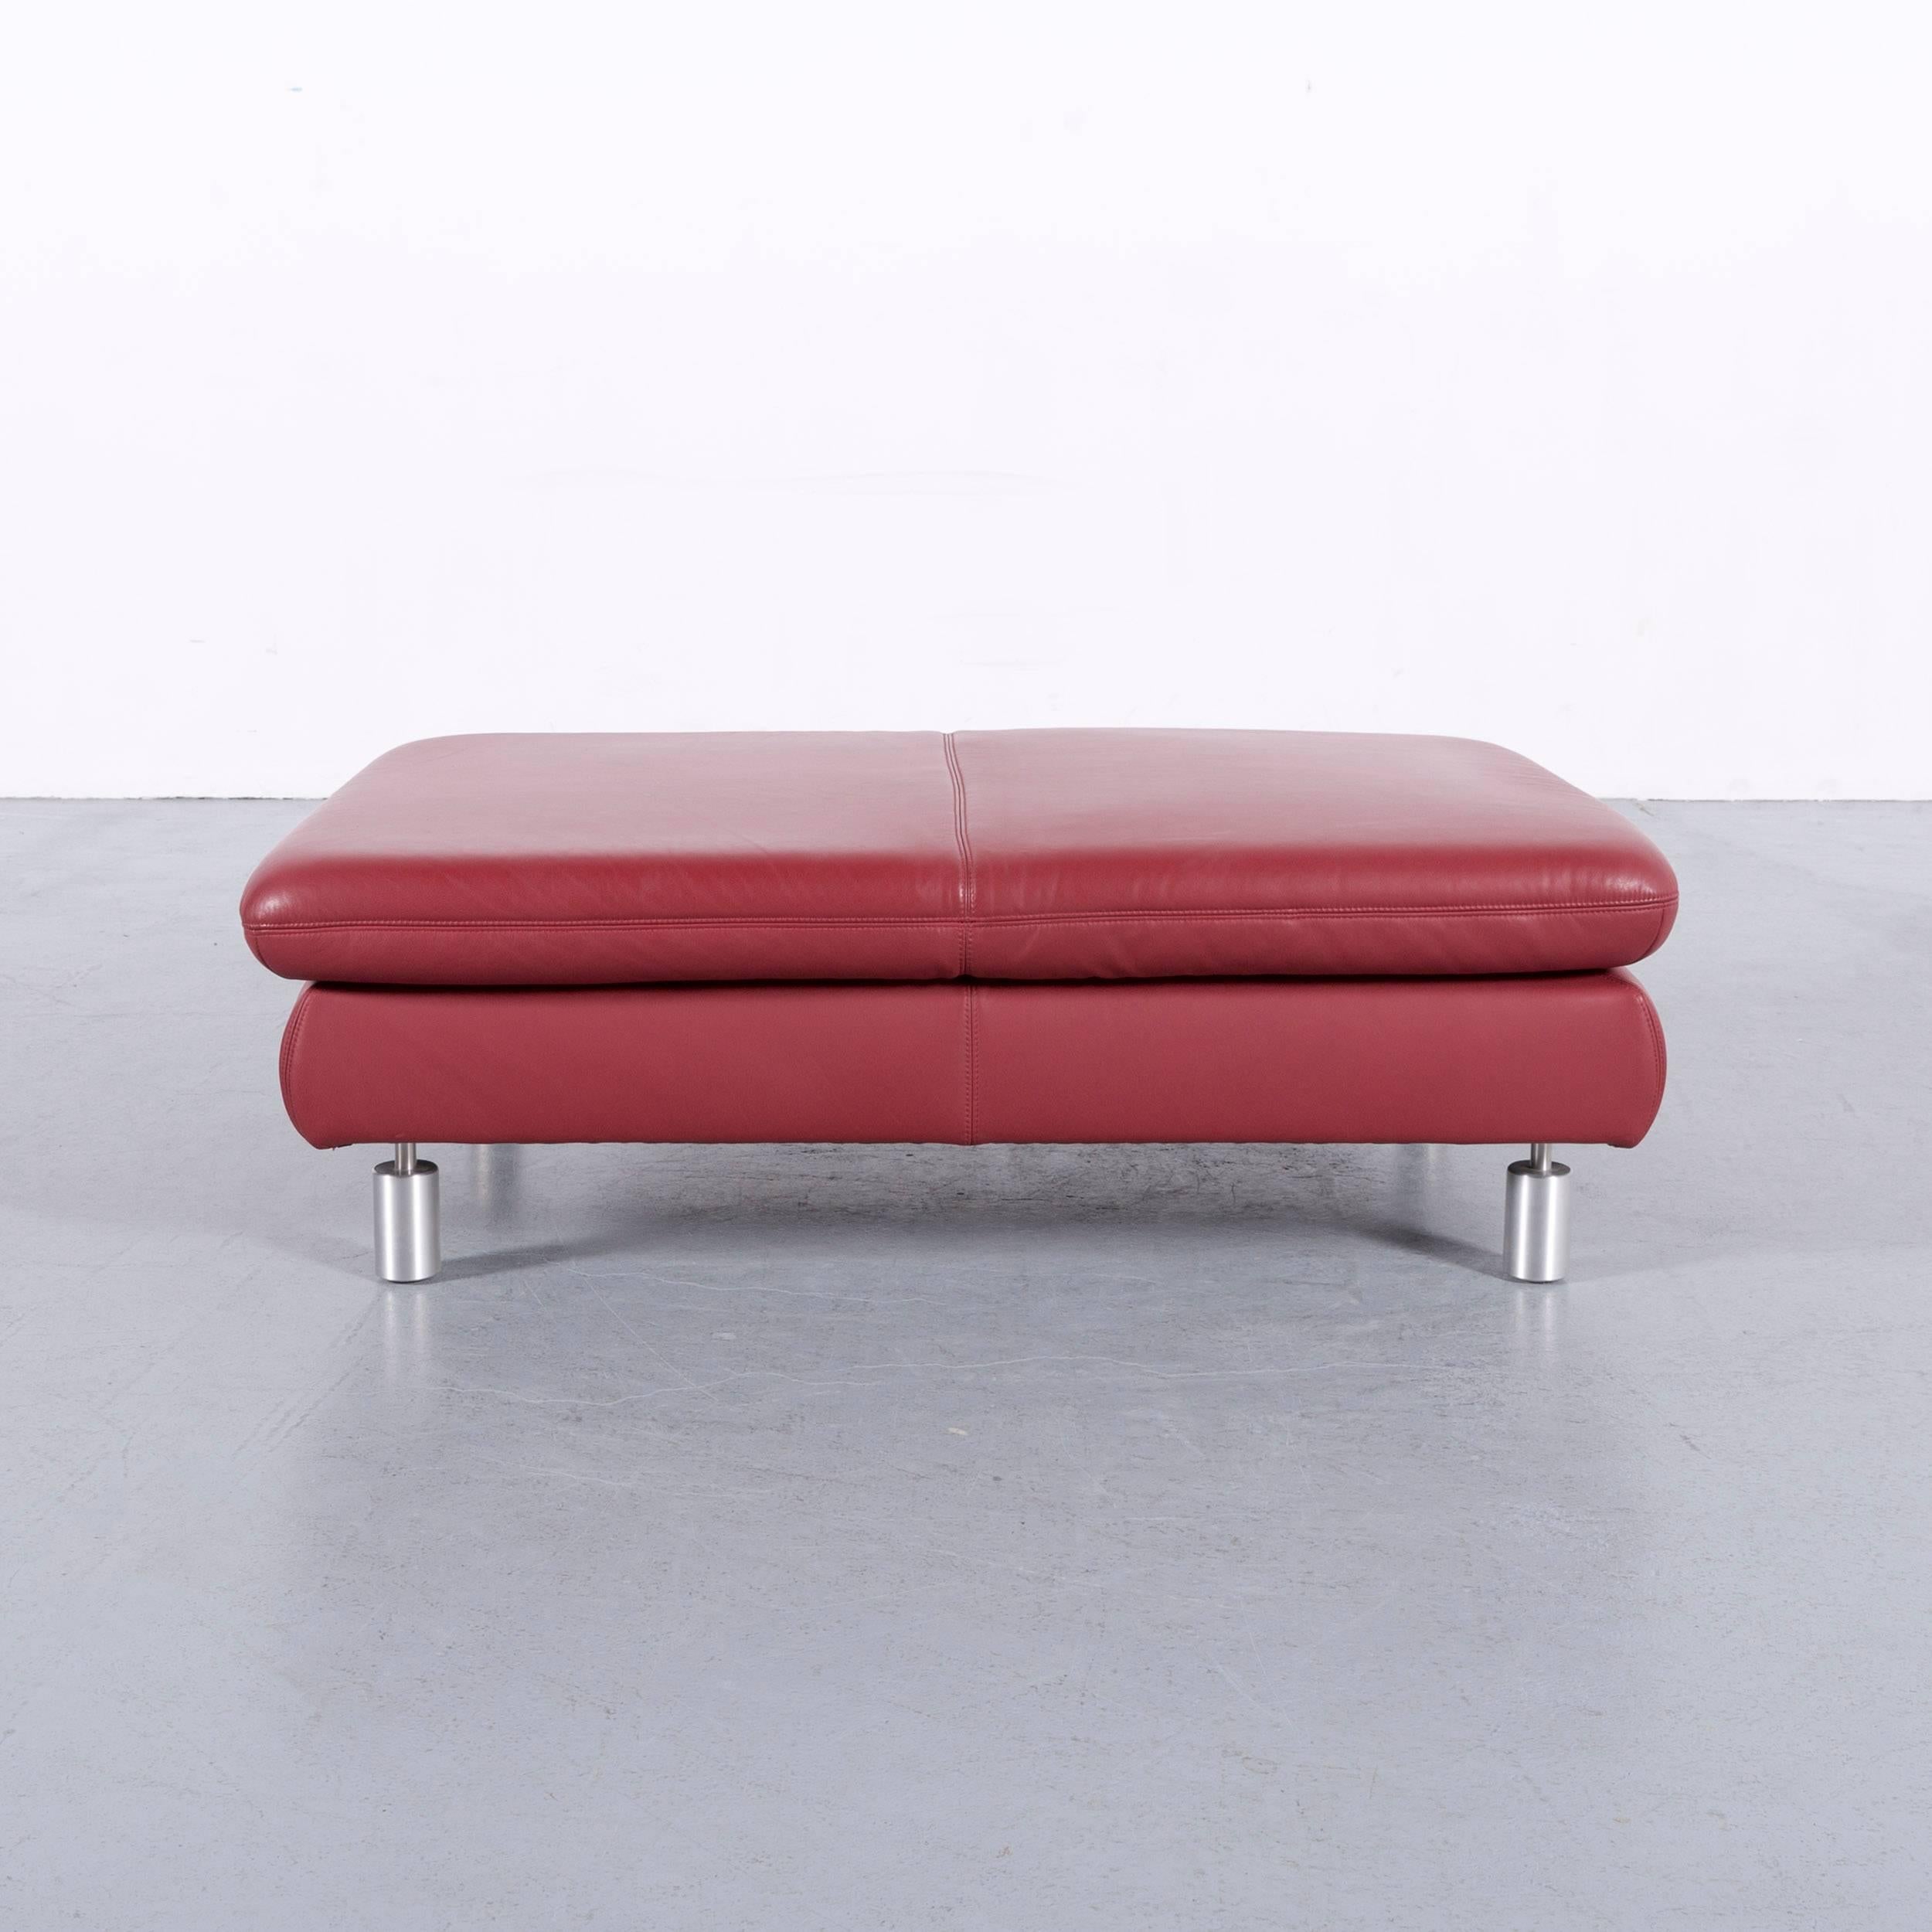 We bring to you an Koinor Rivoli leather foot-stool red bench.

































